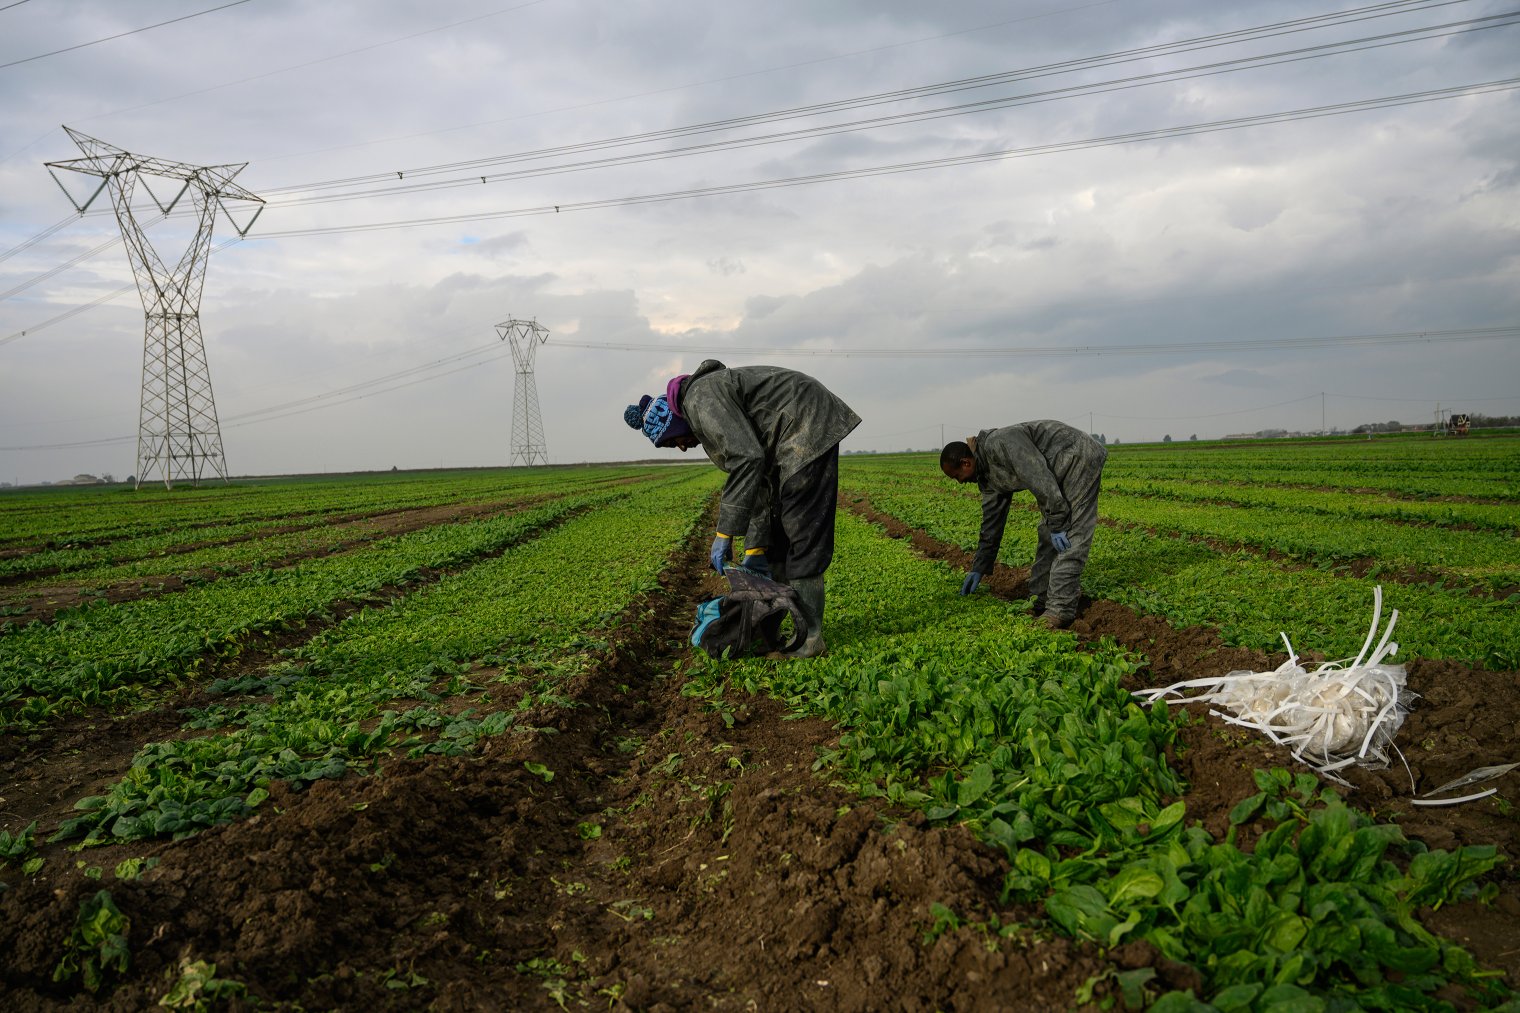 African day laborers who are part of the caporalato system of cheap labor work the fields around Foggia, Italy